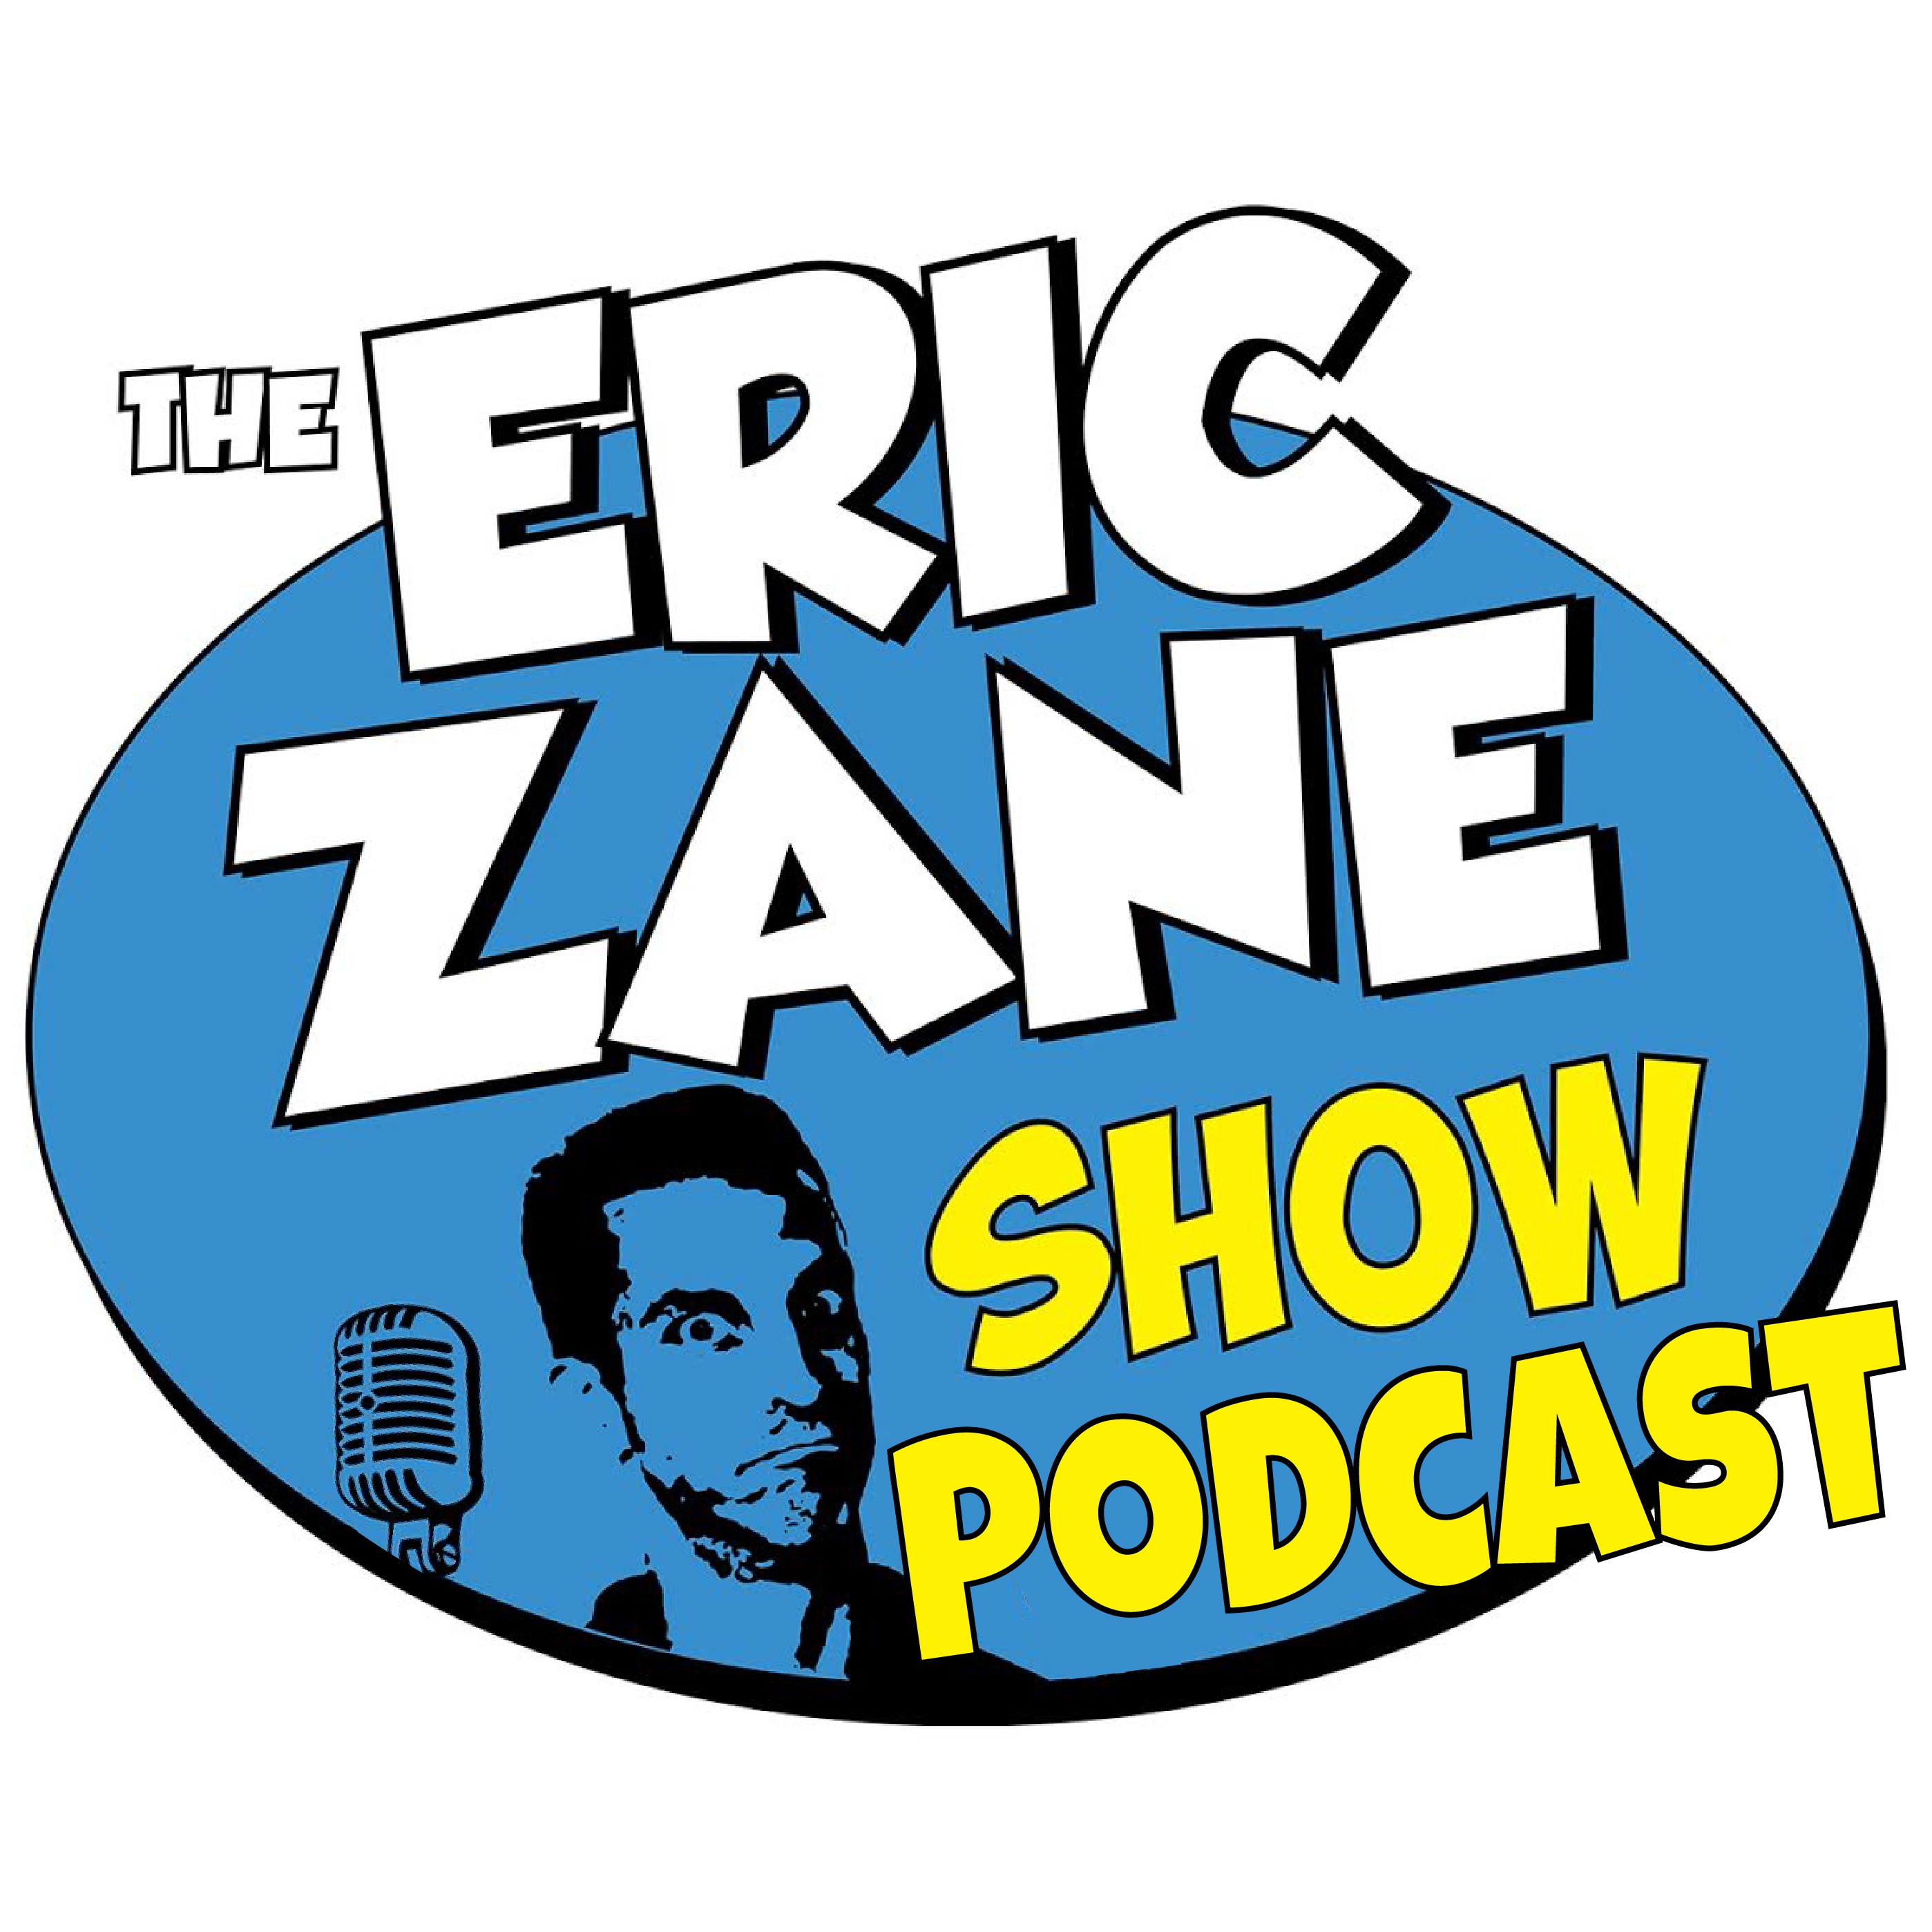 Eric Zane Show Podcast 1005 - Lusk calls a snow day